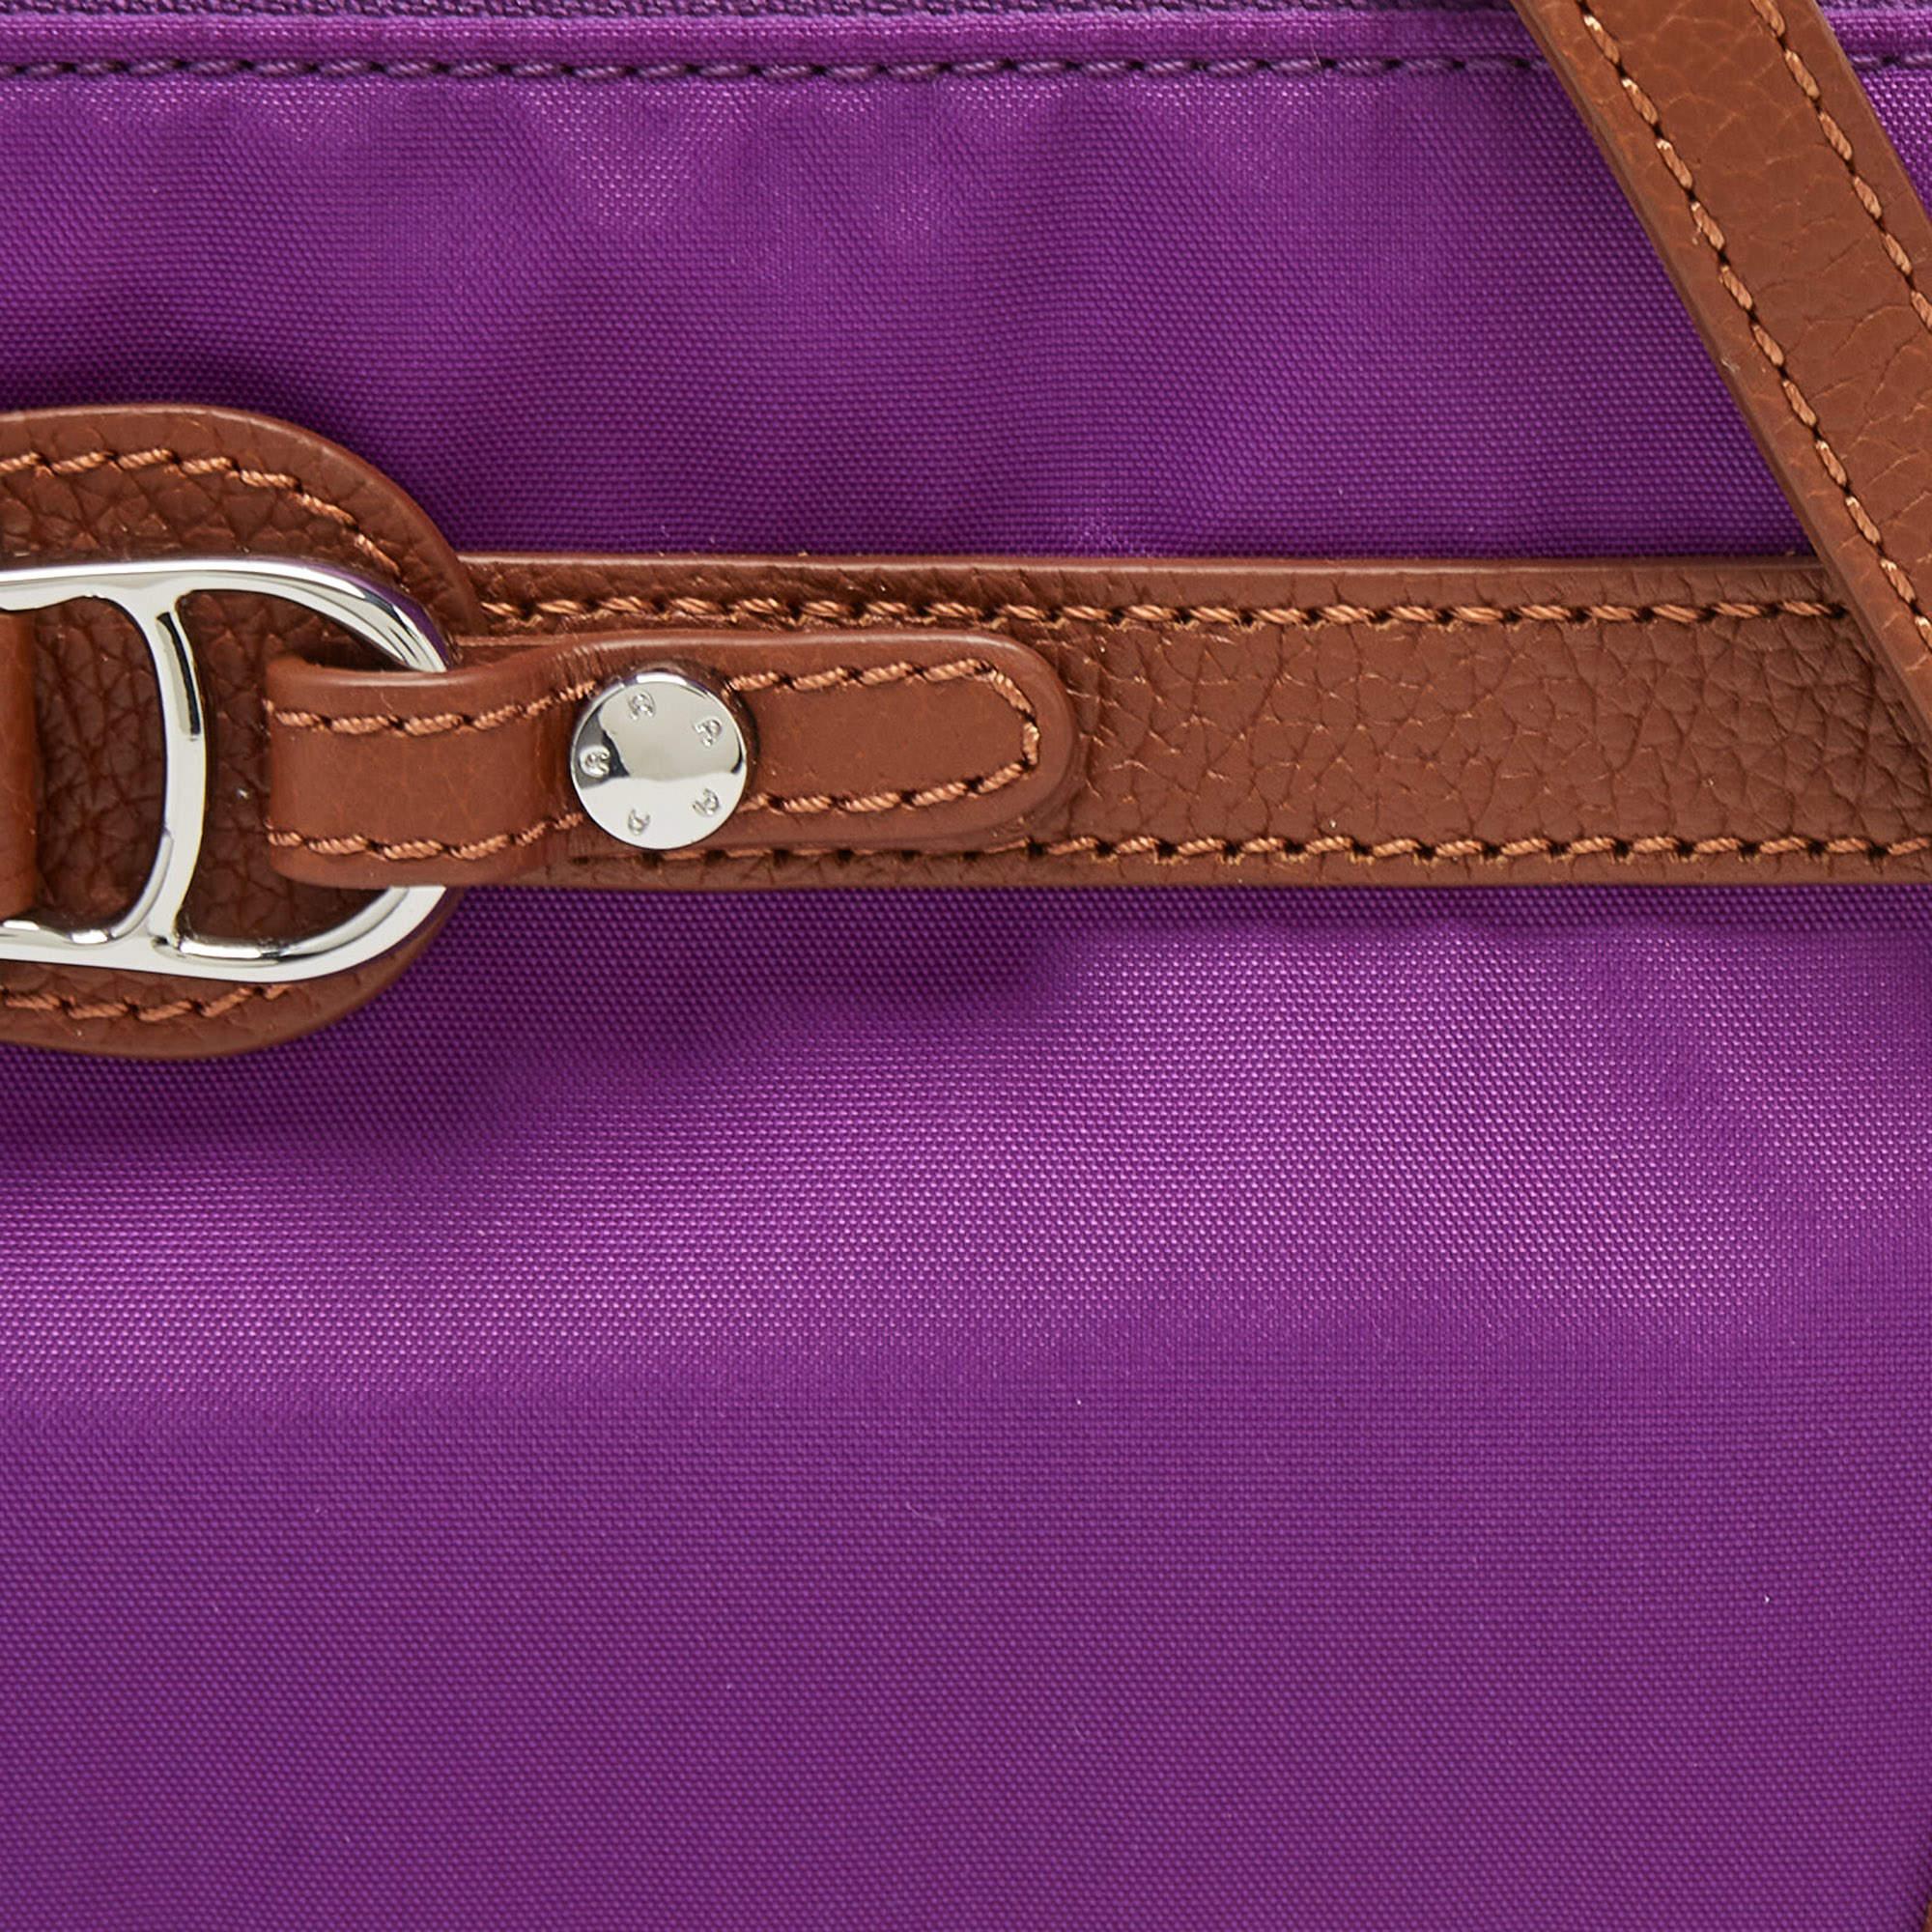 Aigner Purple/Brown Nylon and Leather Buckle Clutch Bag For Sale 3